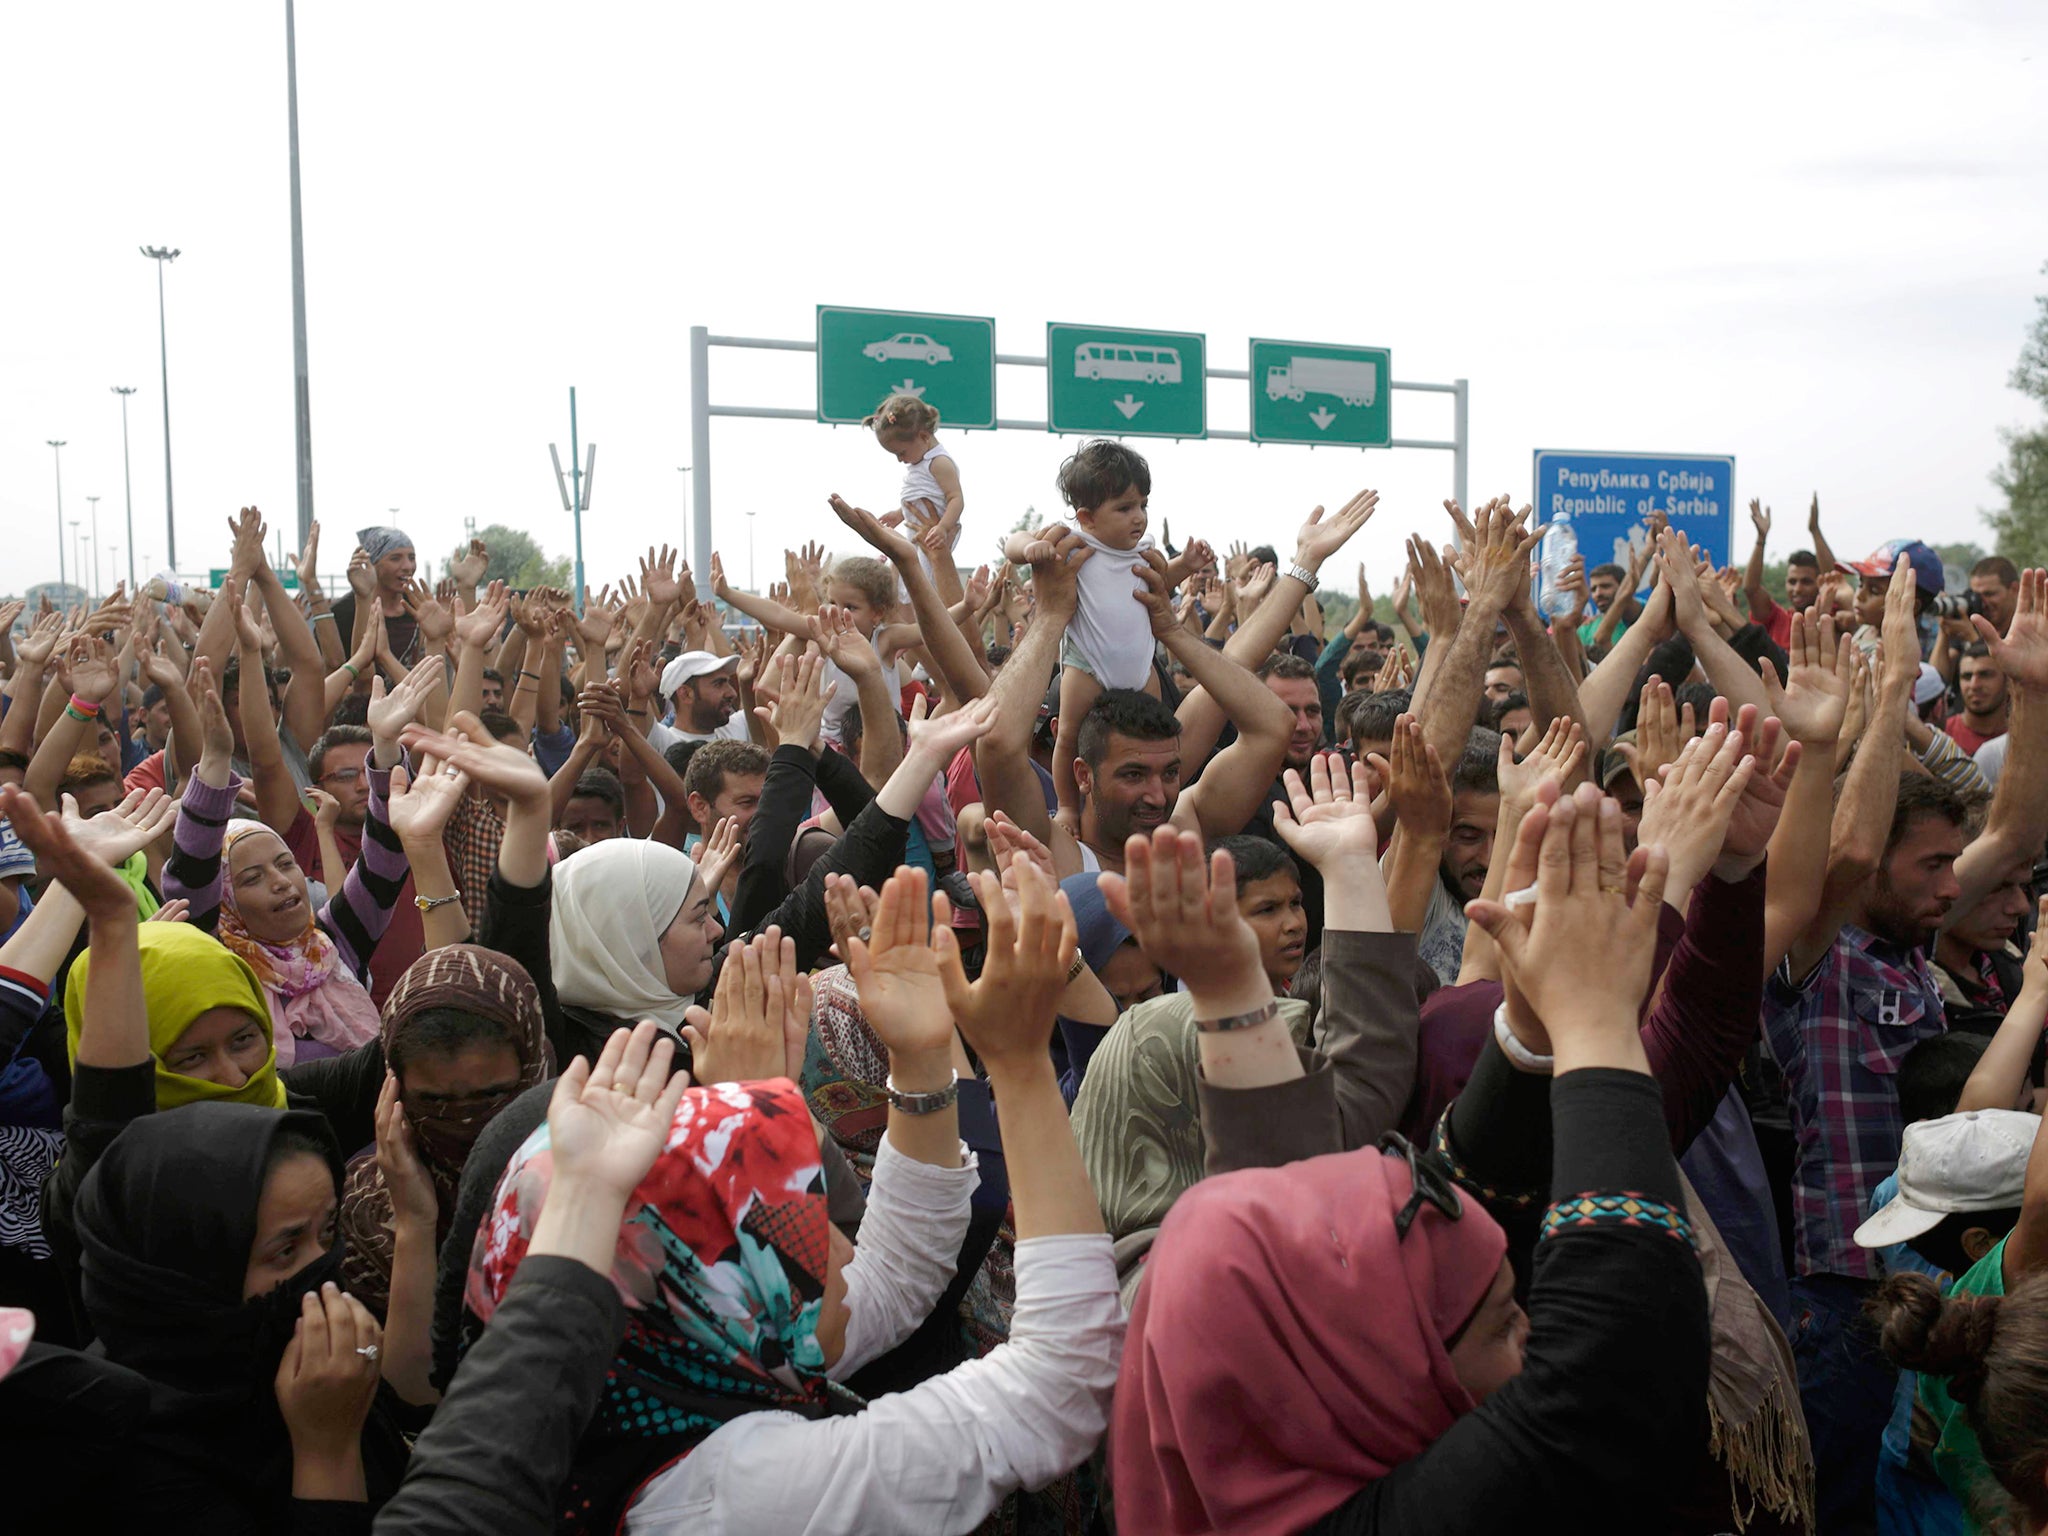 Migrants shout slogans as they stand in front of a barrier at the border with Hungary near the village of Horgos, Serbia